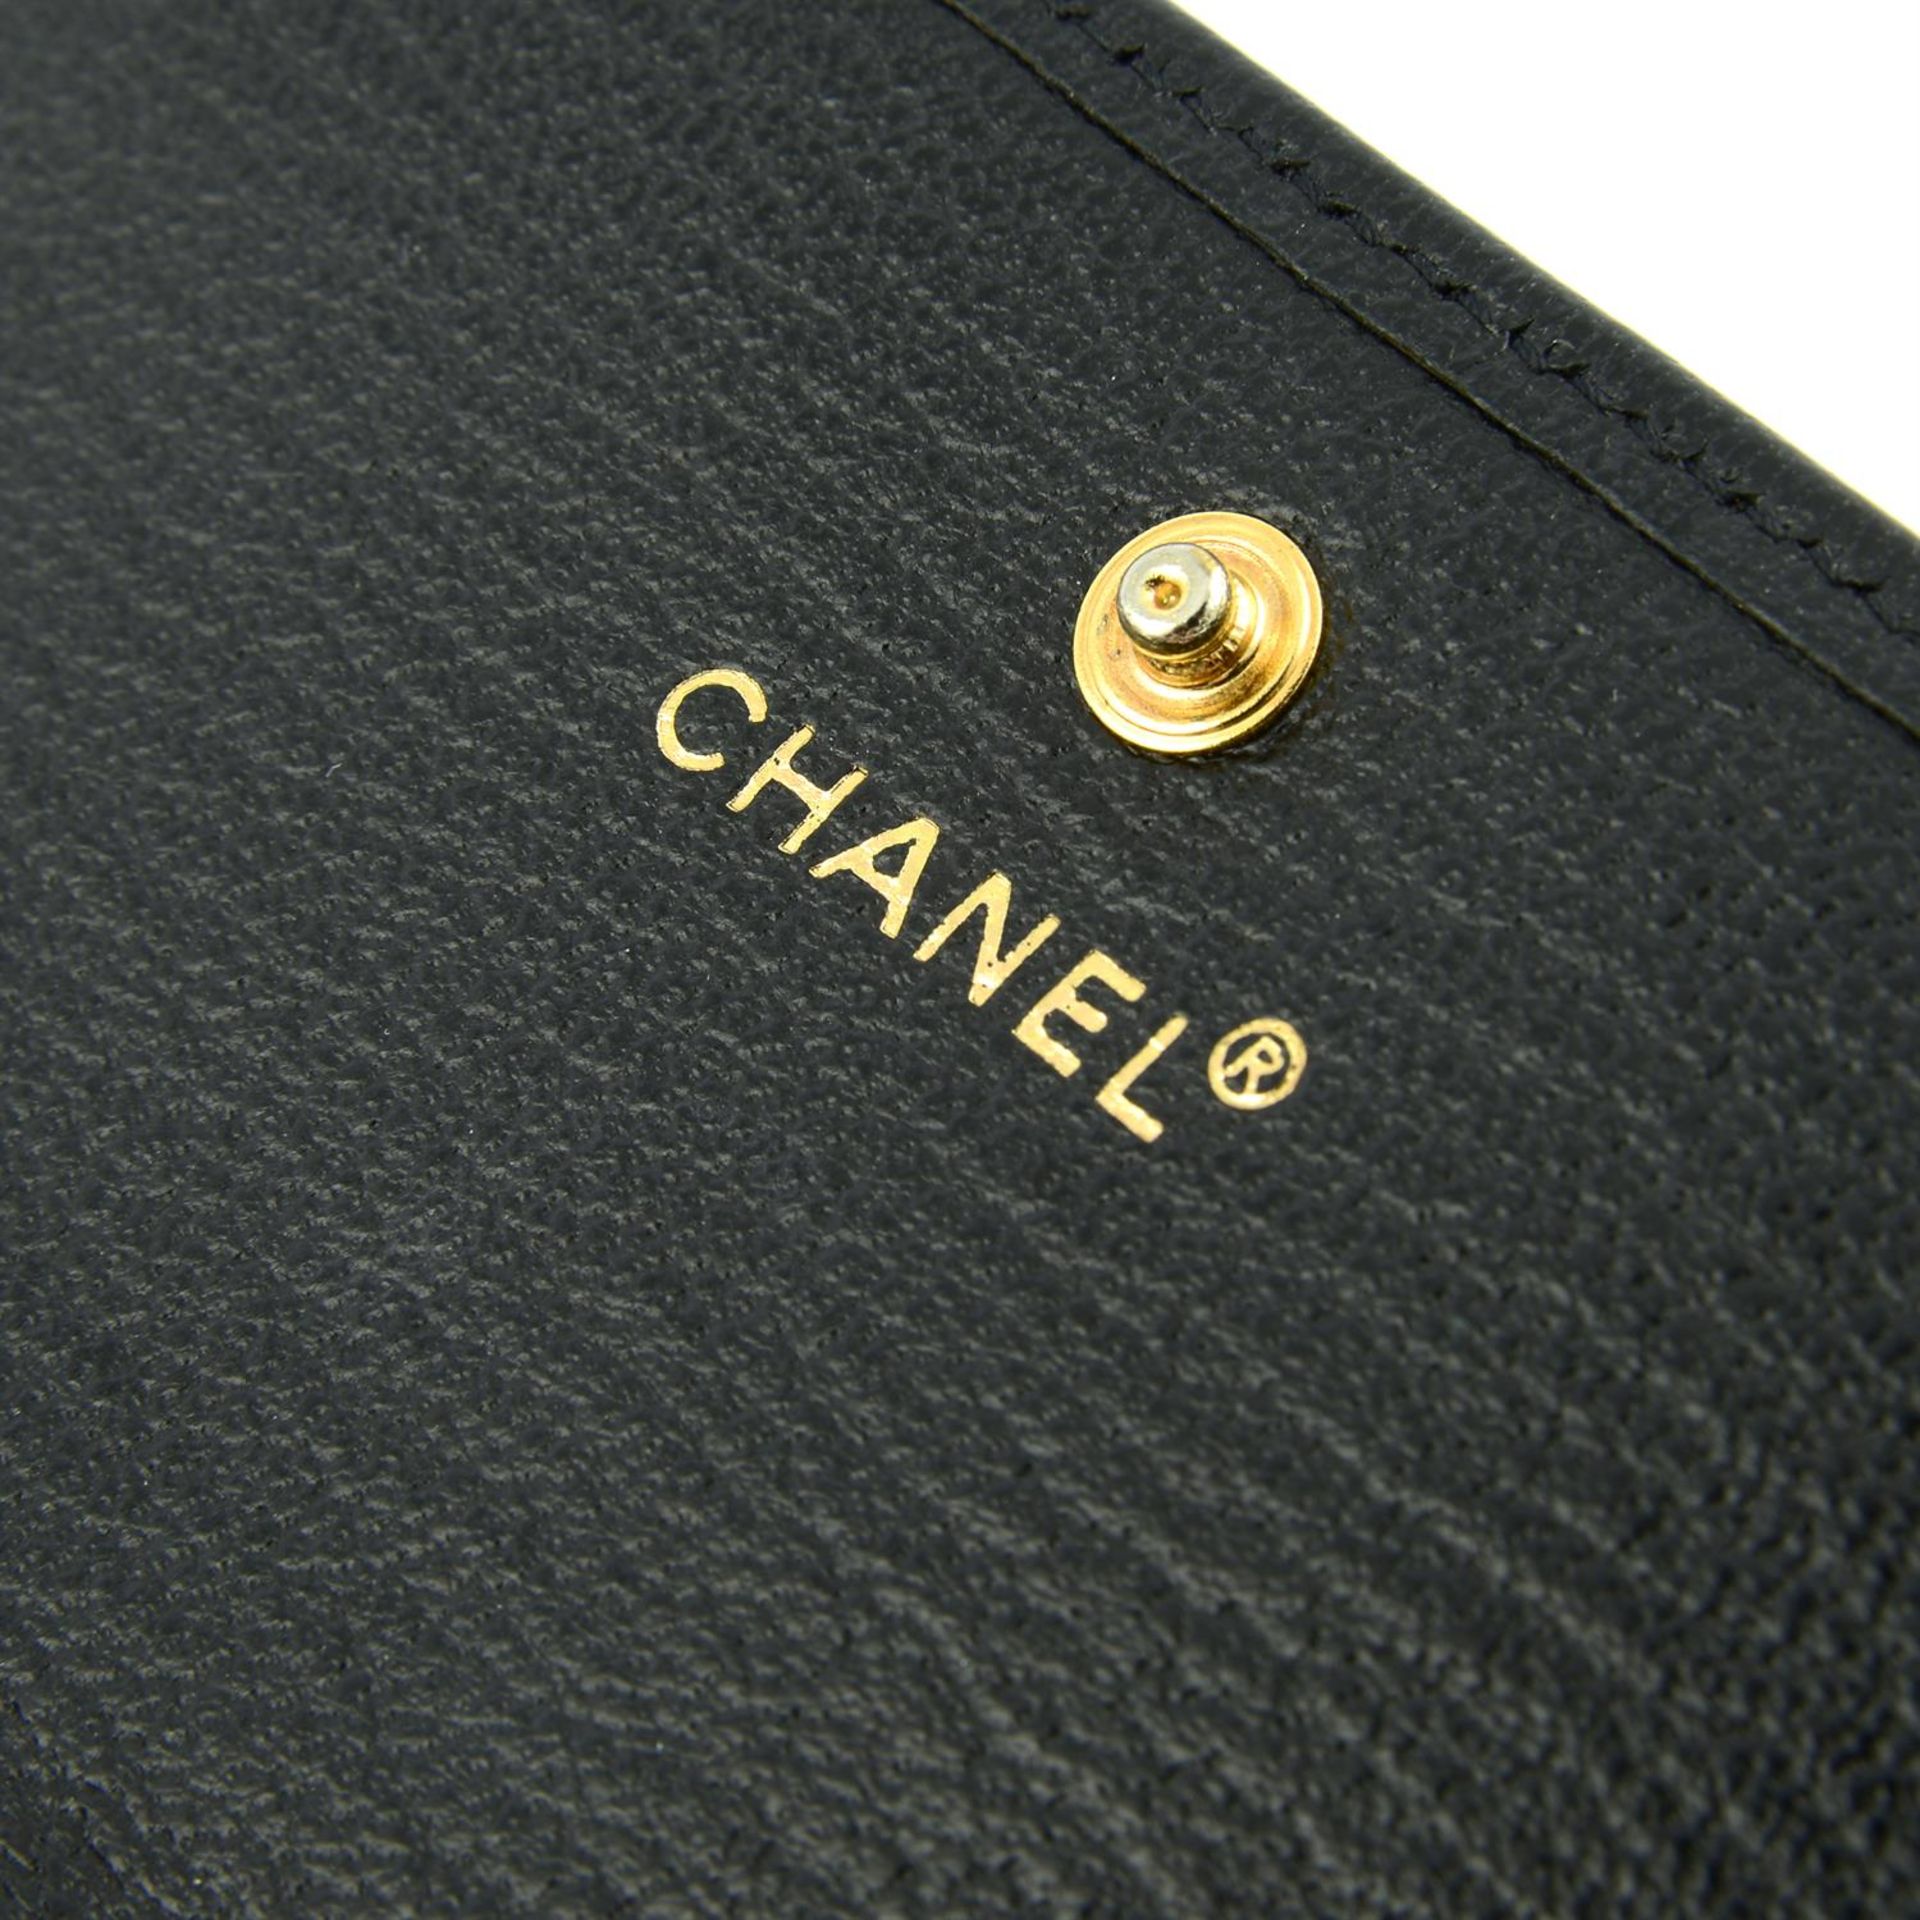 CHANEL - a compact flap wallet. - Image 4 of 4